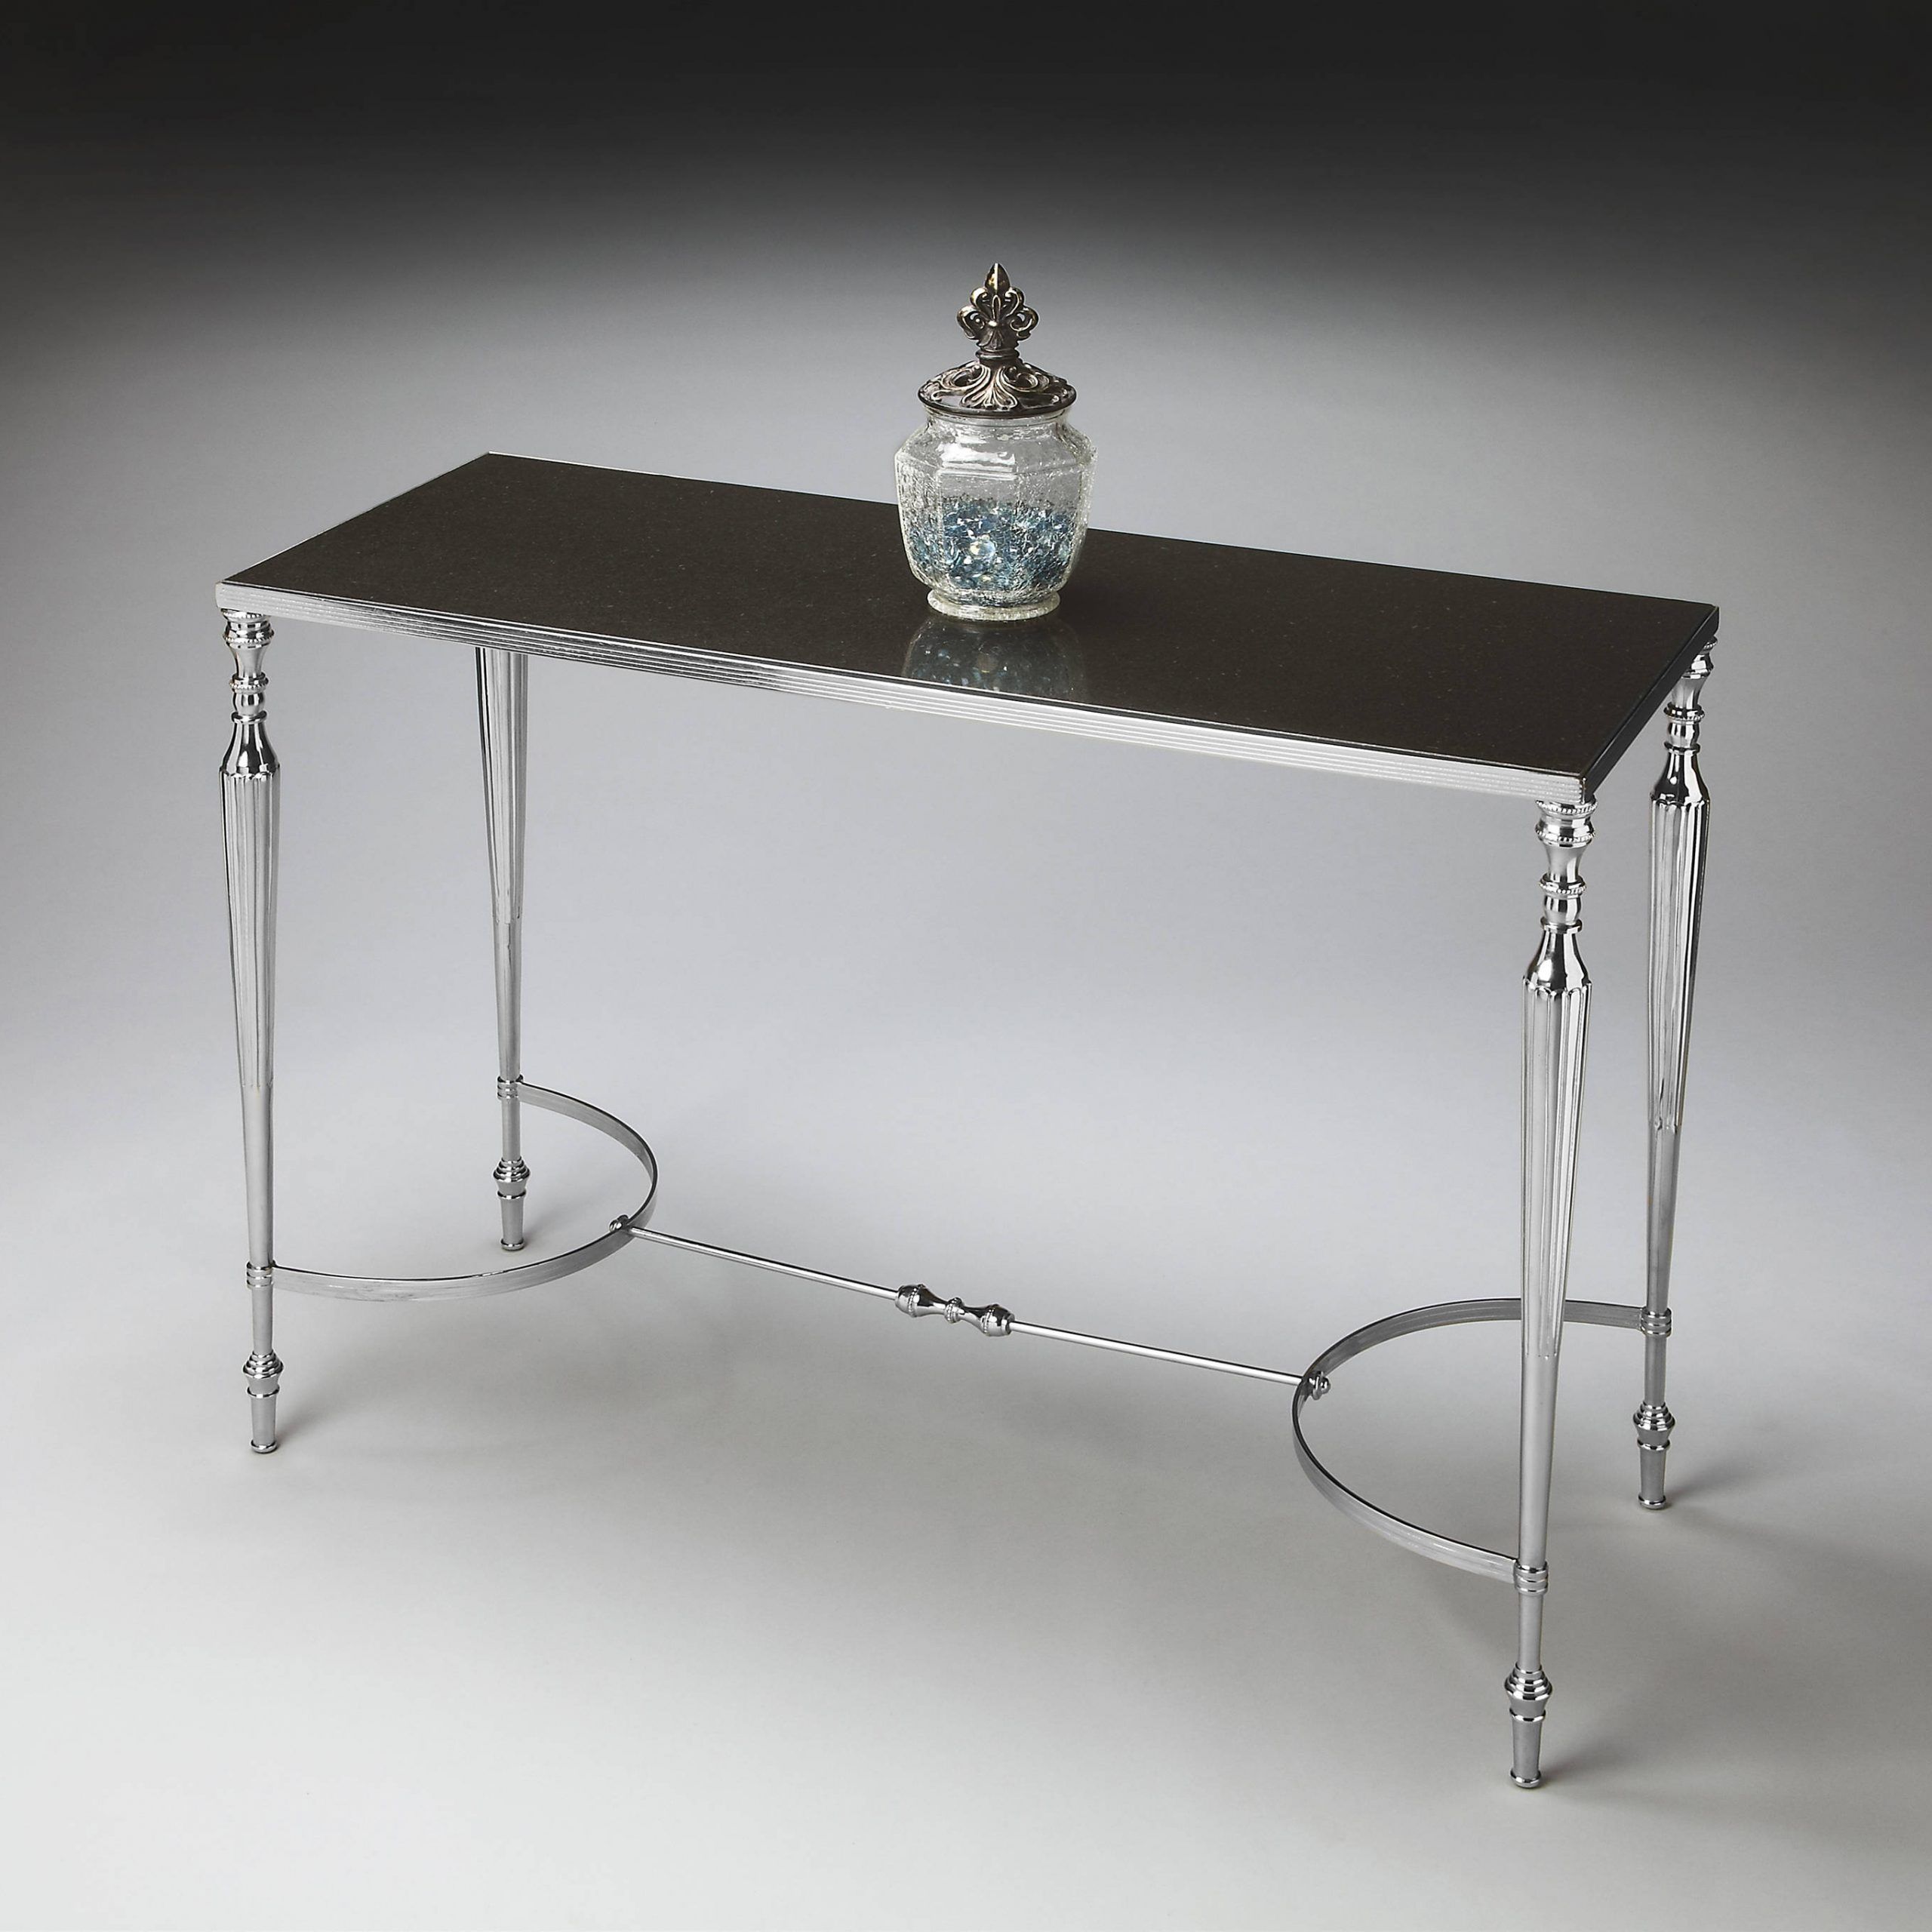 Modern Expressions Transitional Faux Stone Console Sofa Table | The Pertaining To Square Modern Console Tables (View 3 of 20)